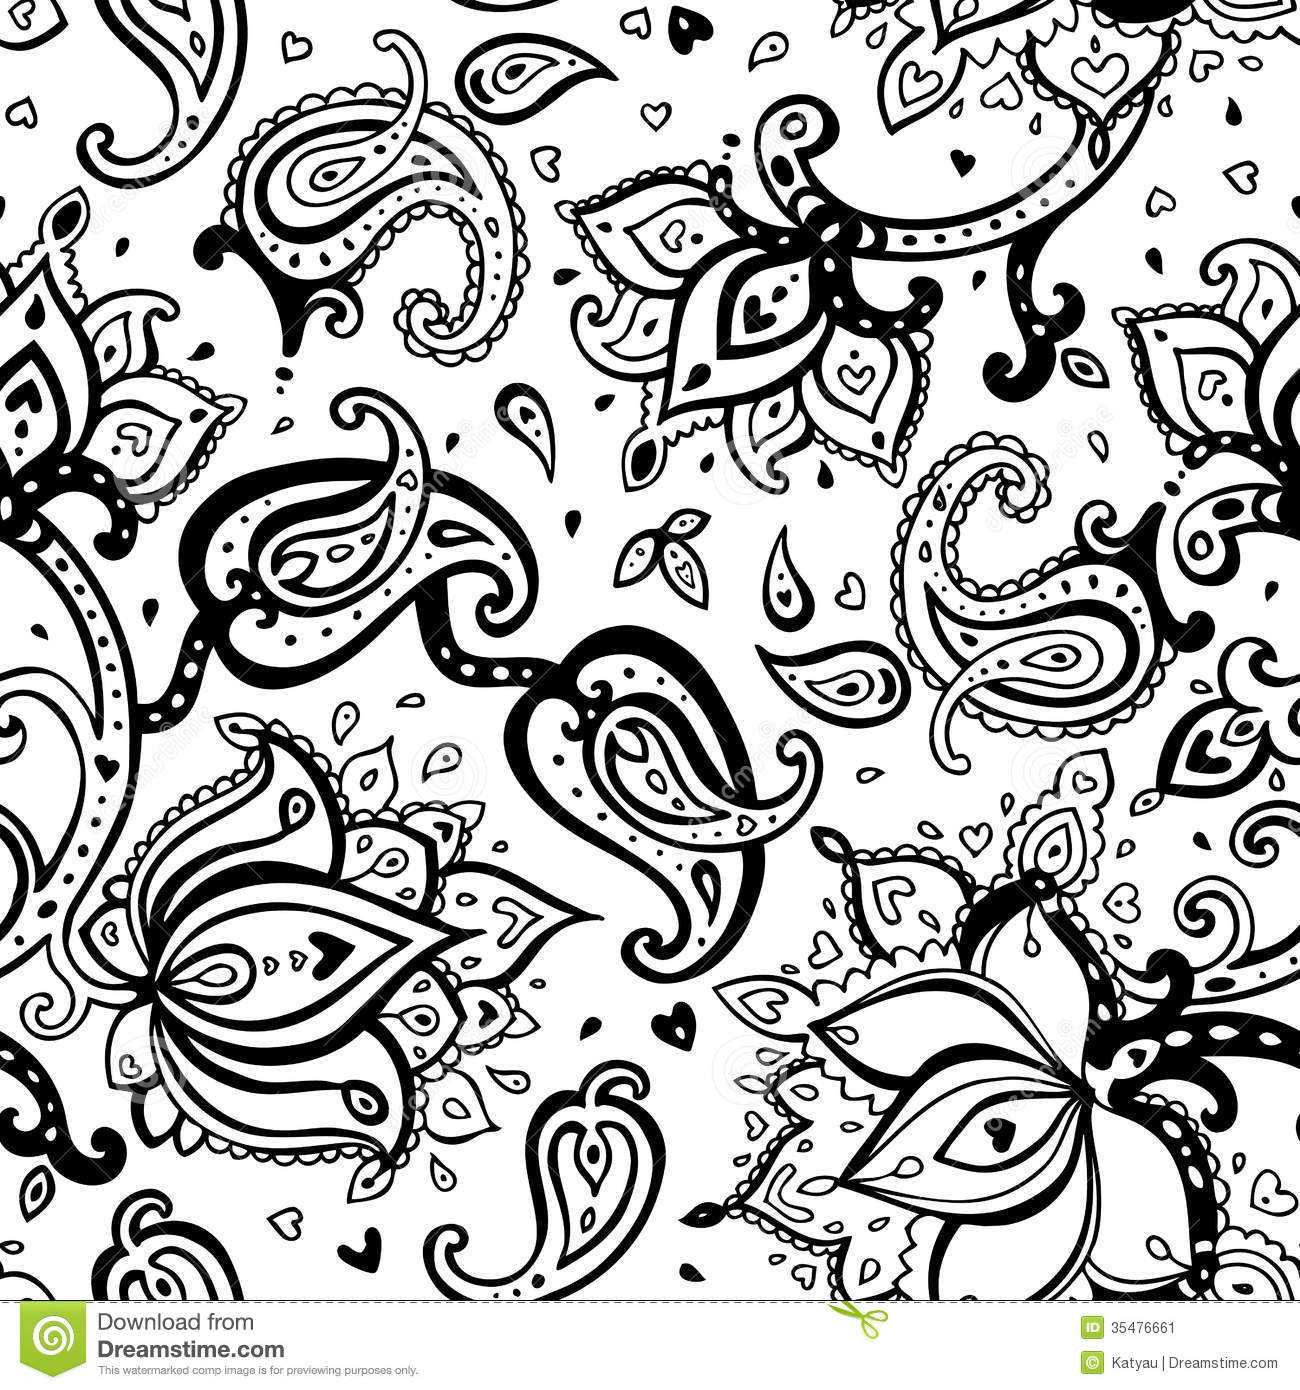 How To Draw Paisley Designs Hand Drawn Pattern